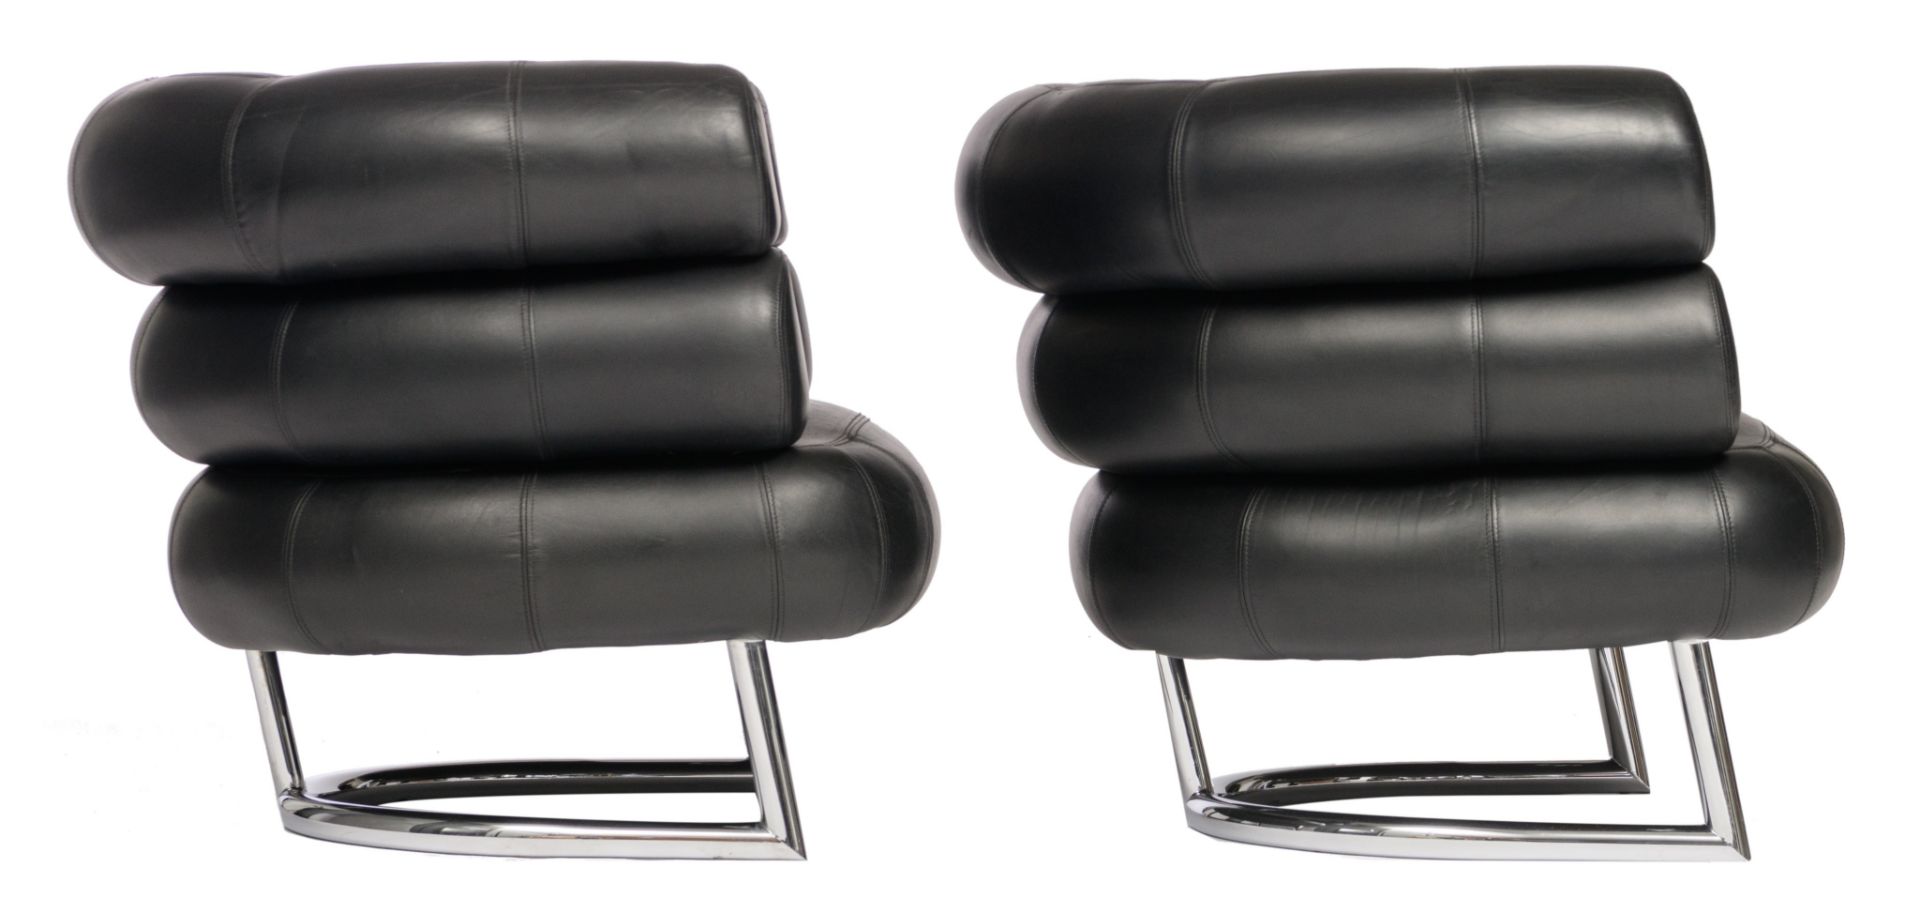 A pair of vintage 'Bibendum chair', designed by Eileen Grey in 1921, H 70 - W 92 cm - Image 5 of 9